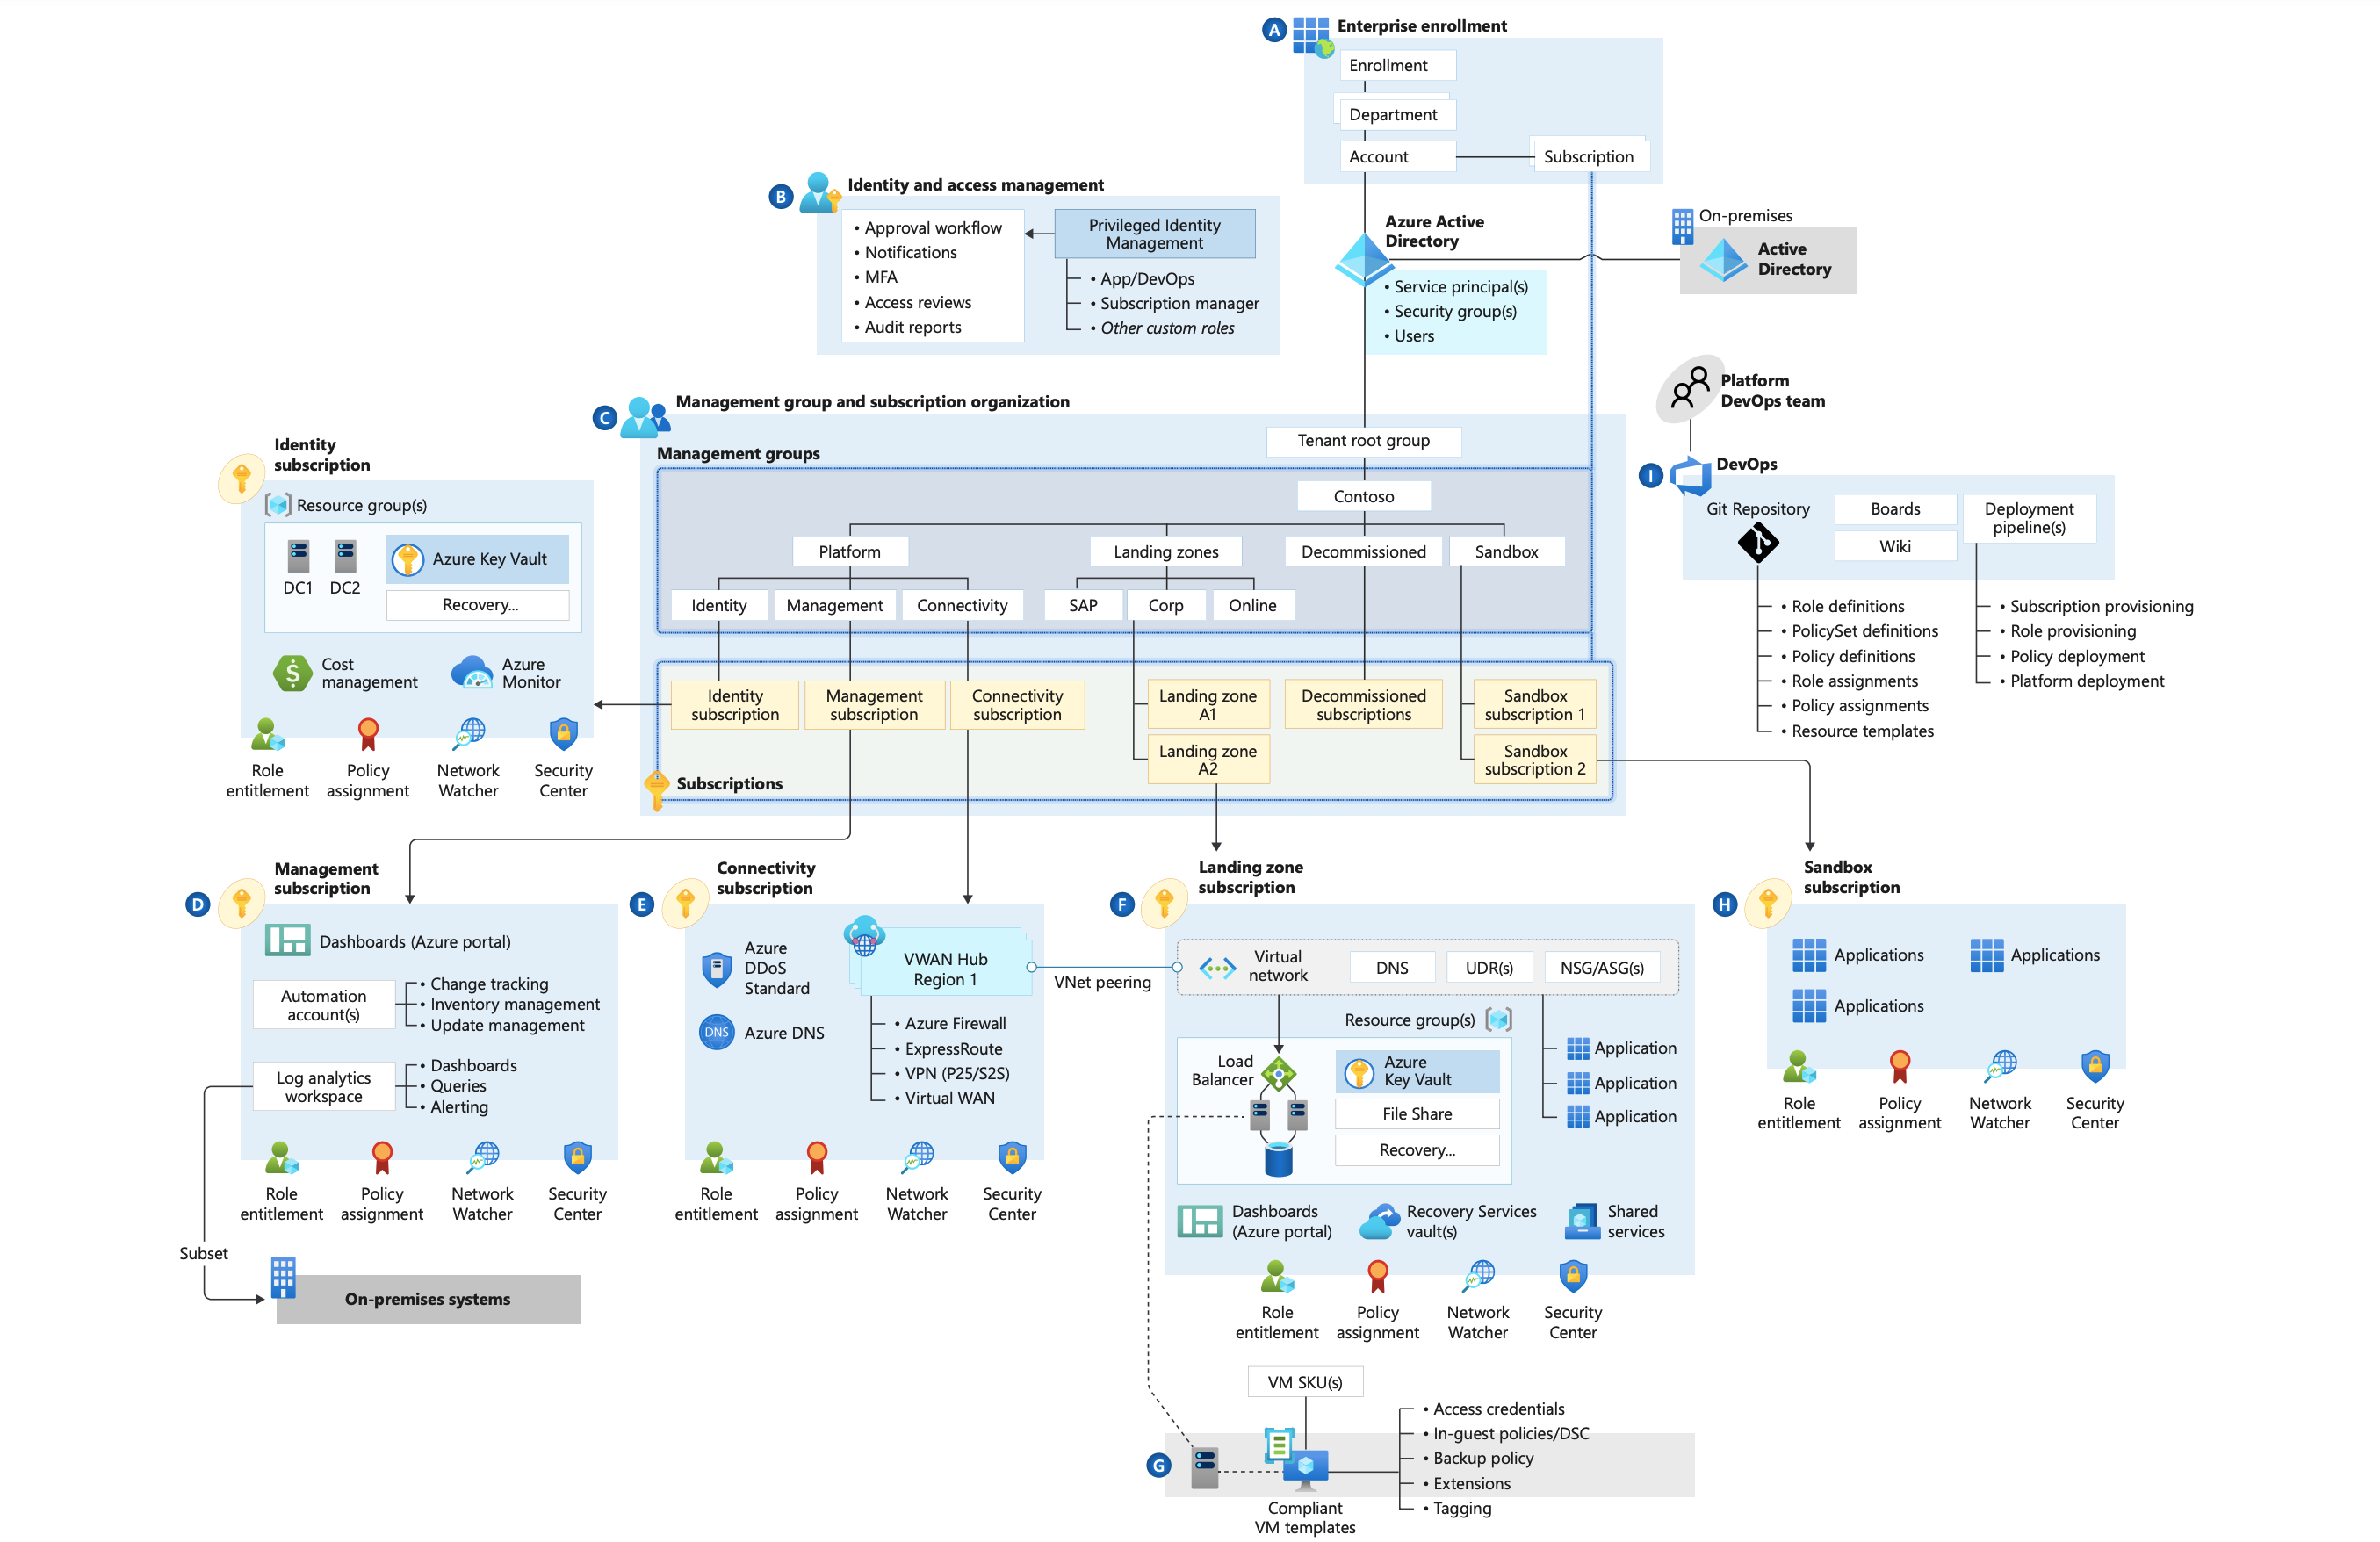 Cloud Adoption Framework enterprise-scale landing zone architecture based on an Azure Virtual WAN network topology. The connectivity subscription uses a Virtual WAN hub.